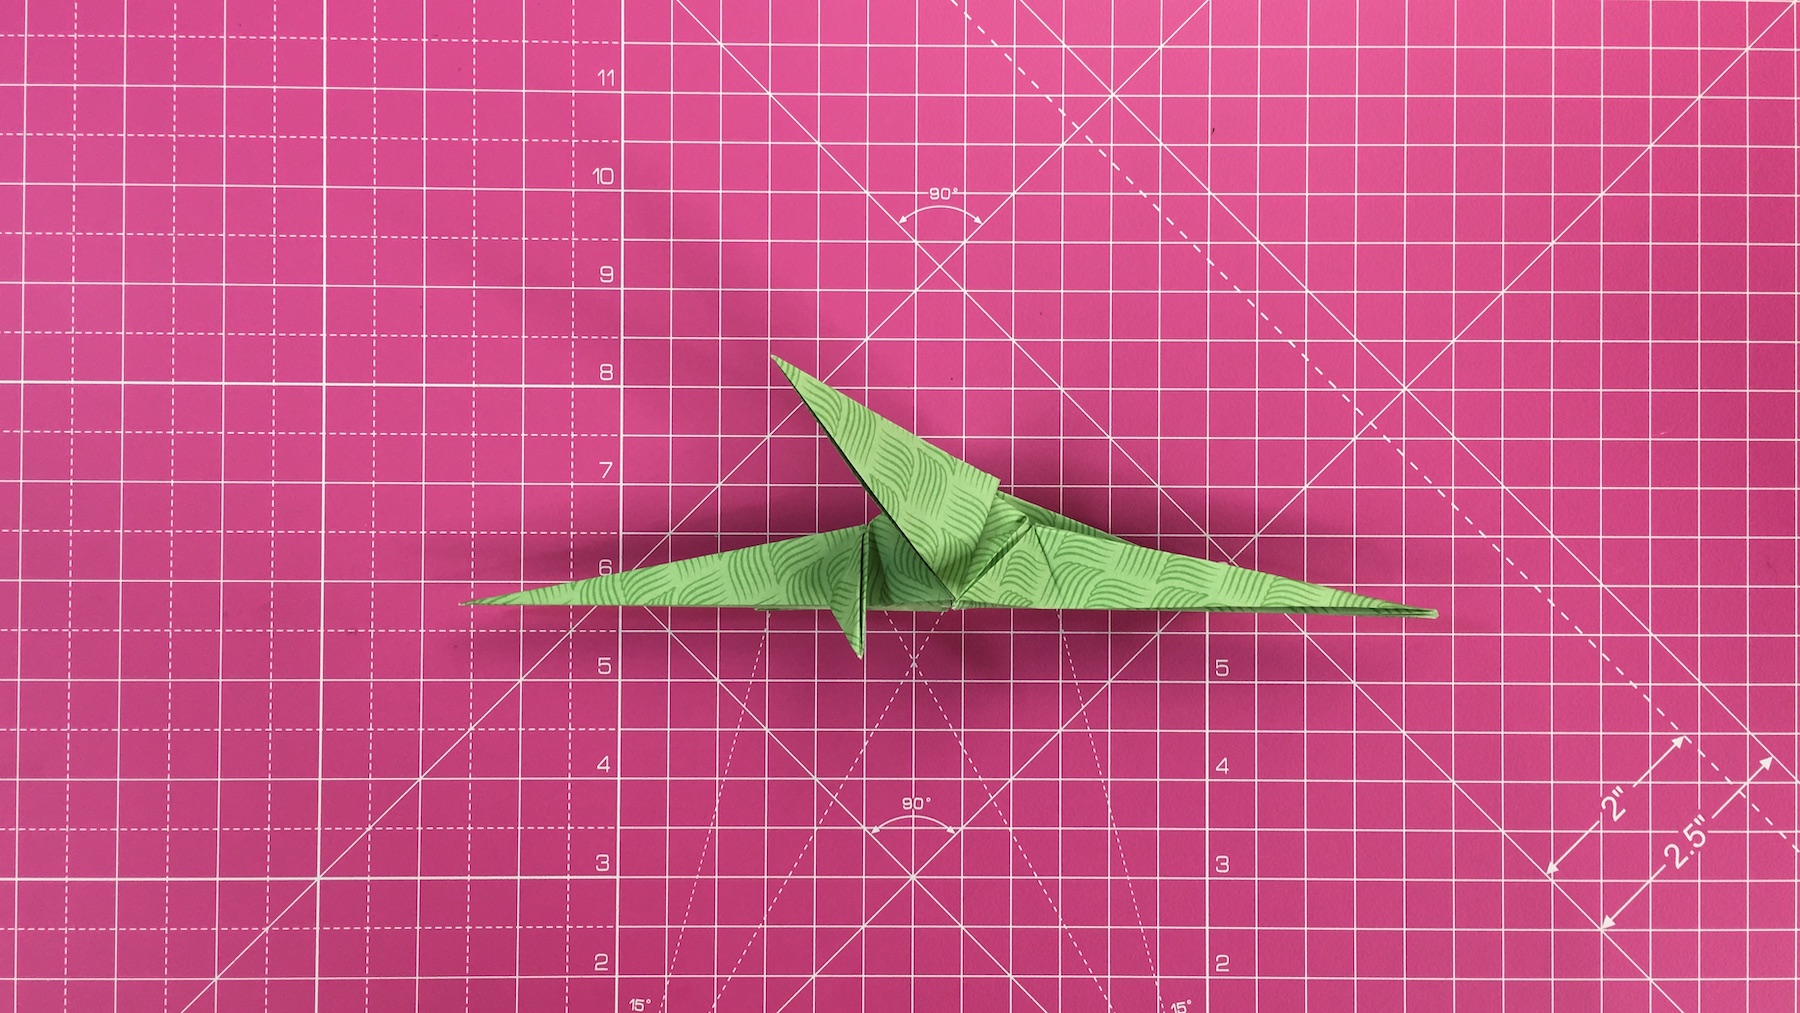 How to make an origami dragon, origami dragon tutorial - step 37